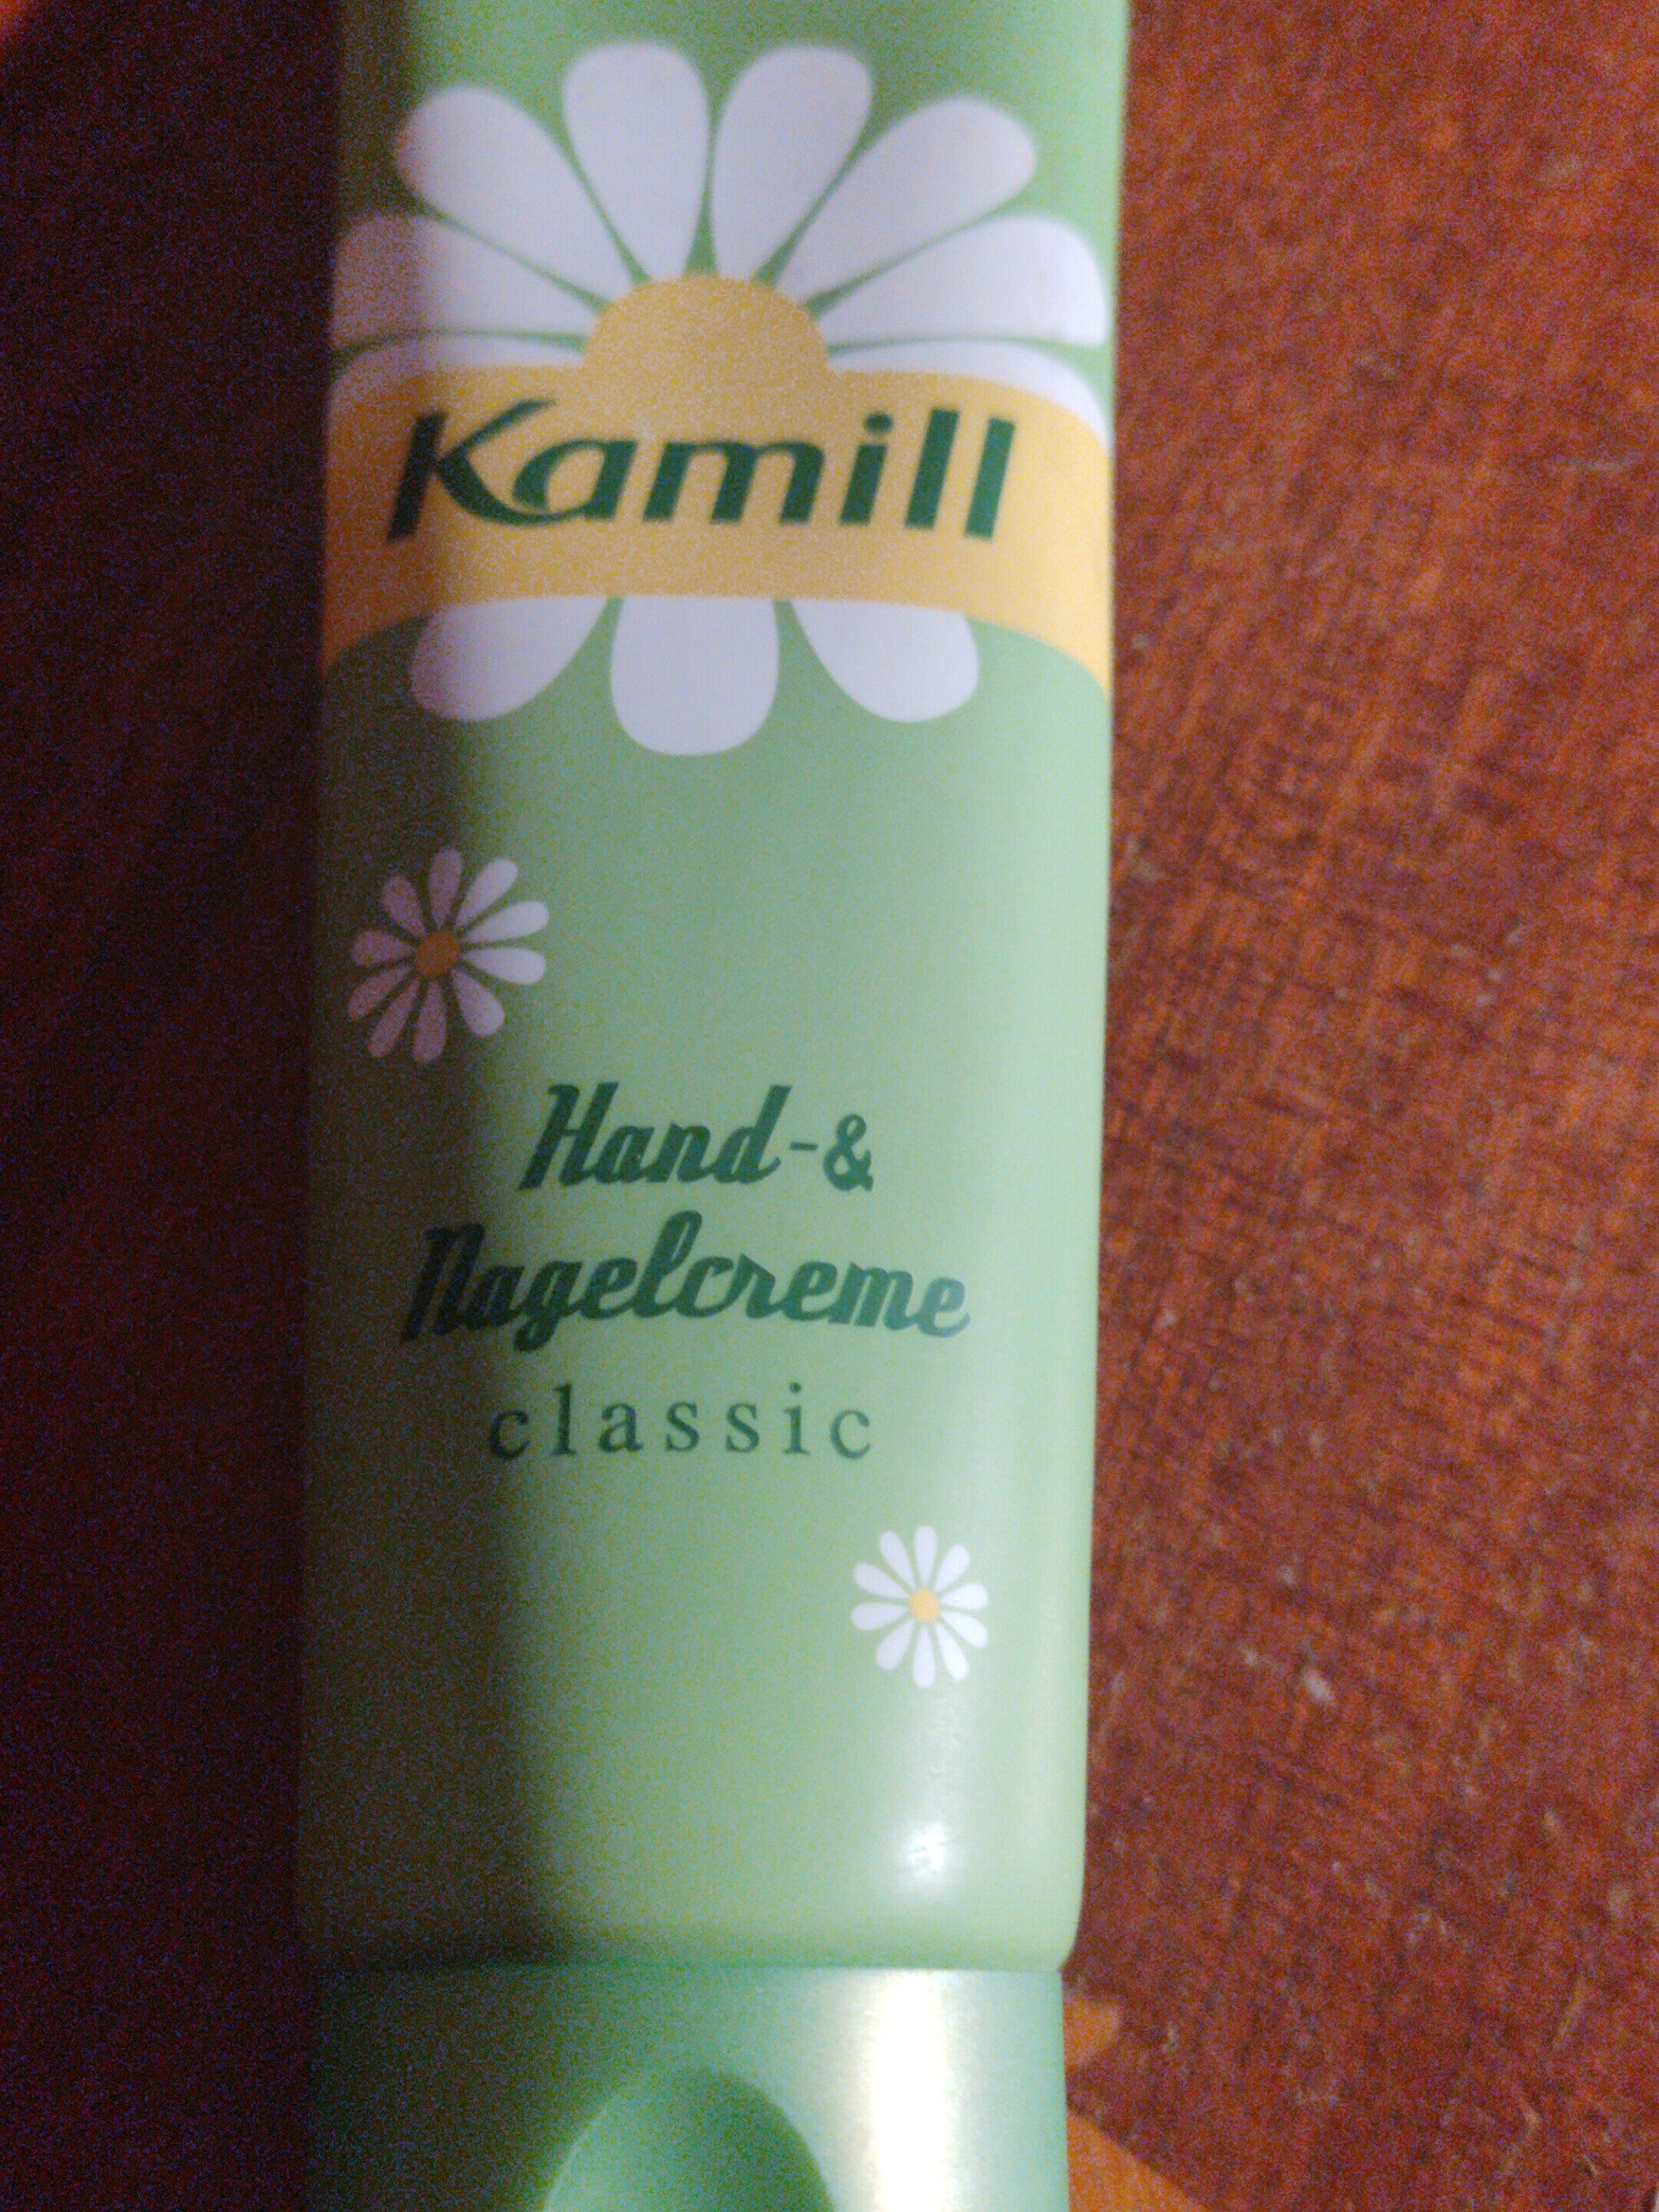 Kamill - Hand & Nagelcrem Classic - Tuote - de